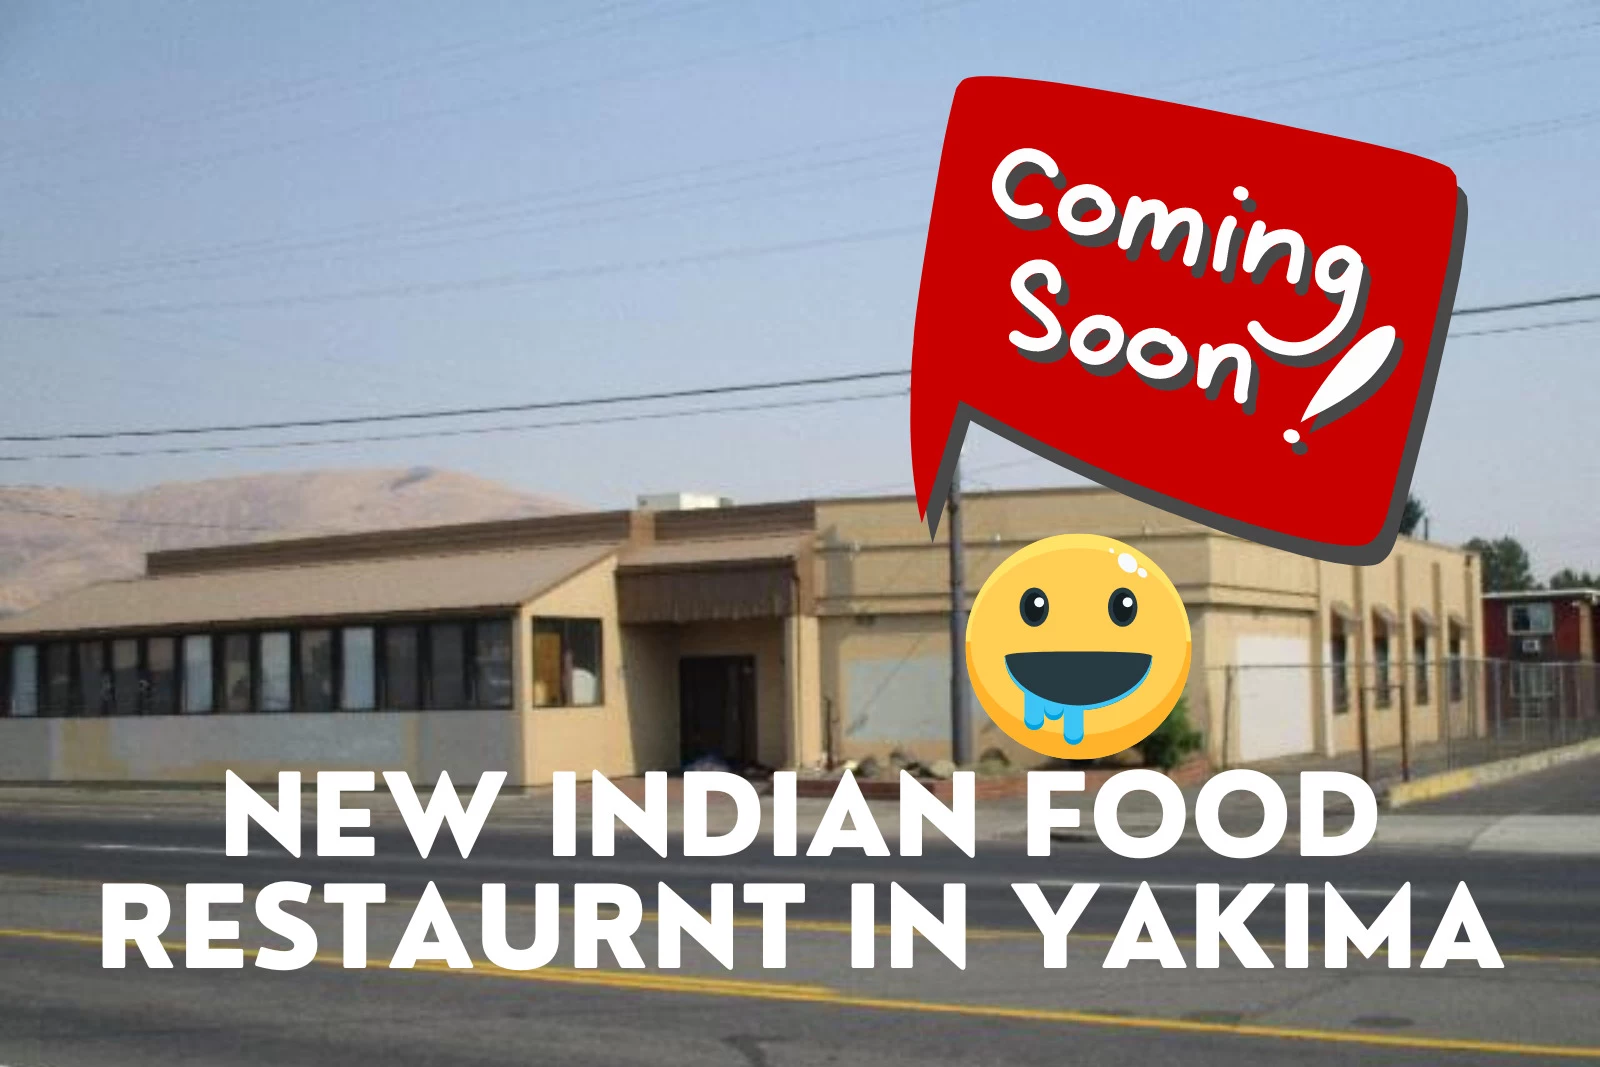 The Spice' Indian Cuisine Is Now Open in Yakima… kinda